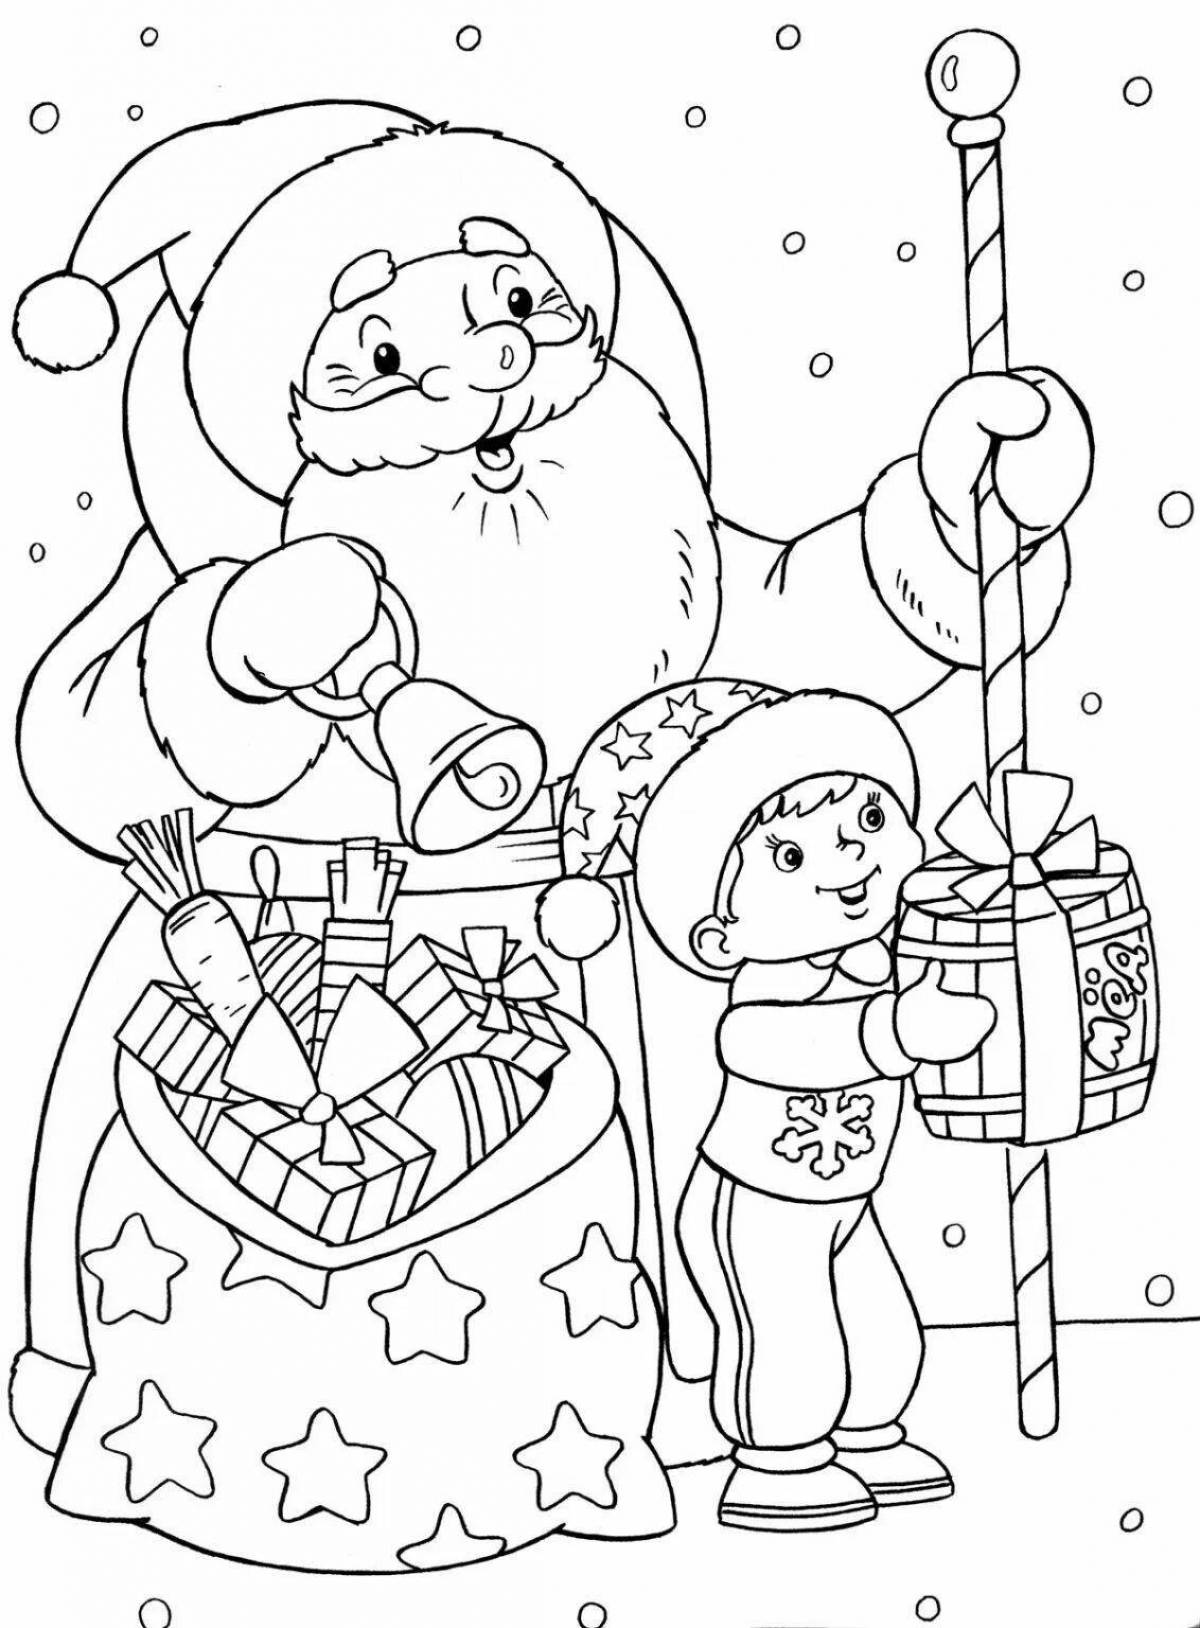 A fascinating children's Christmas coloring book